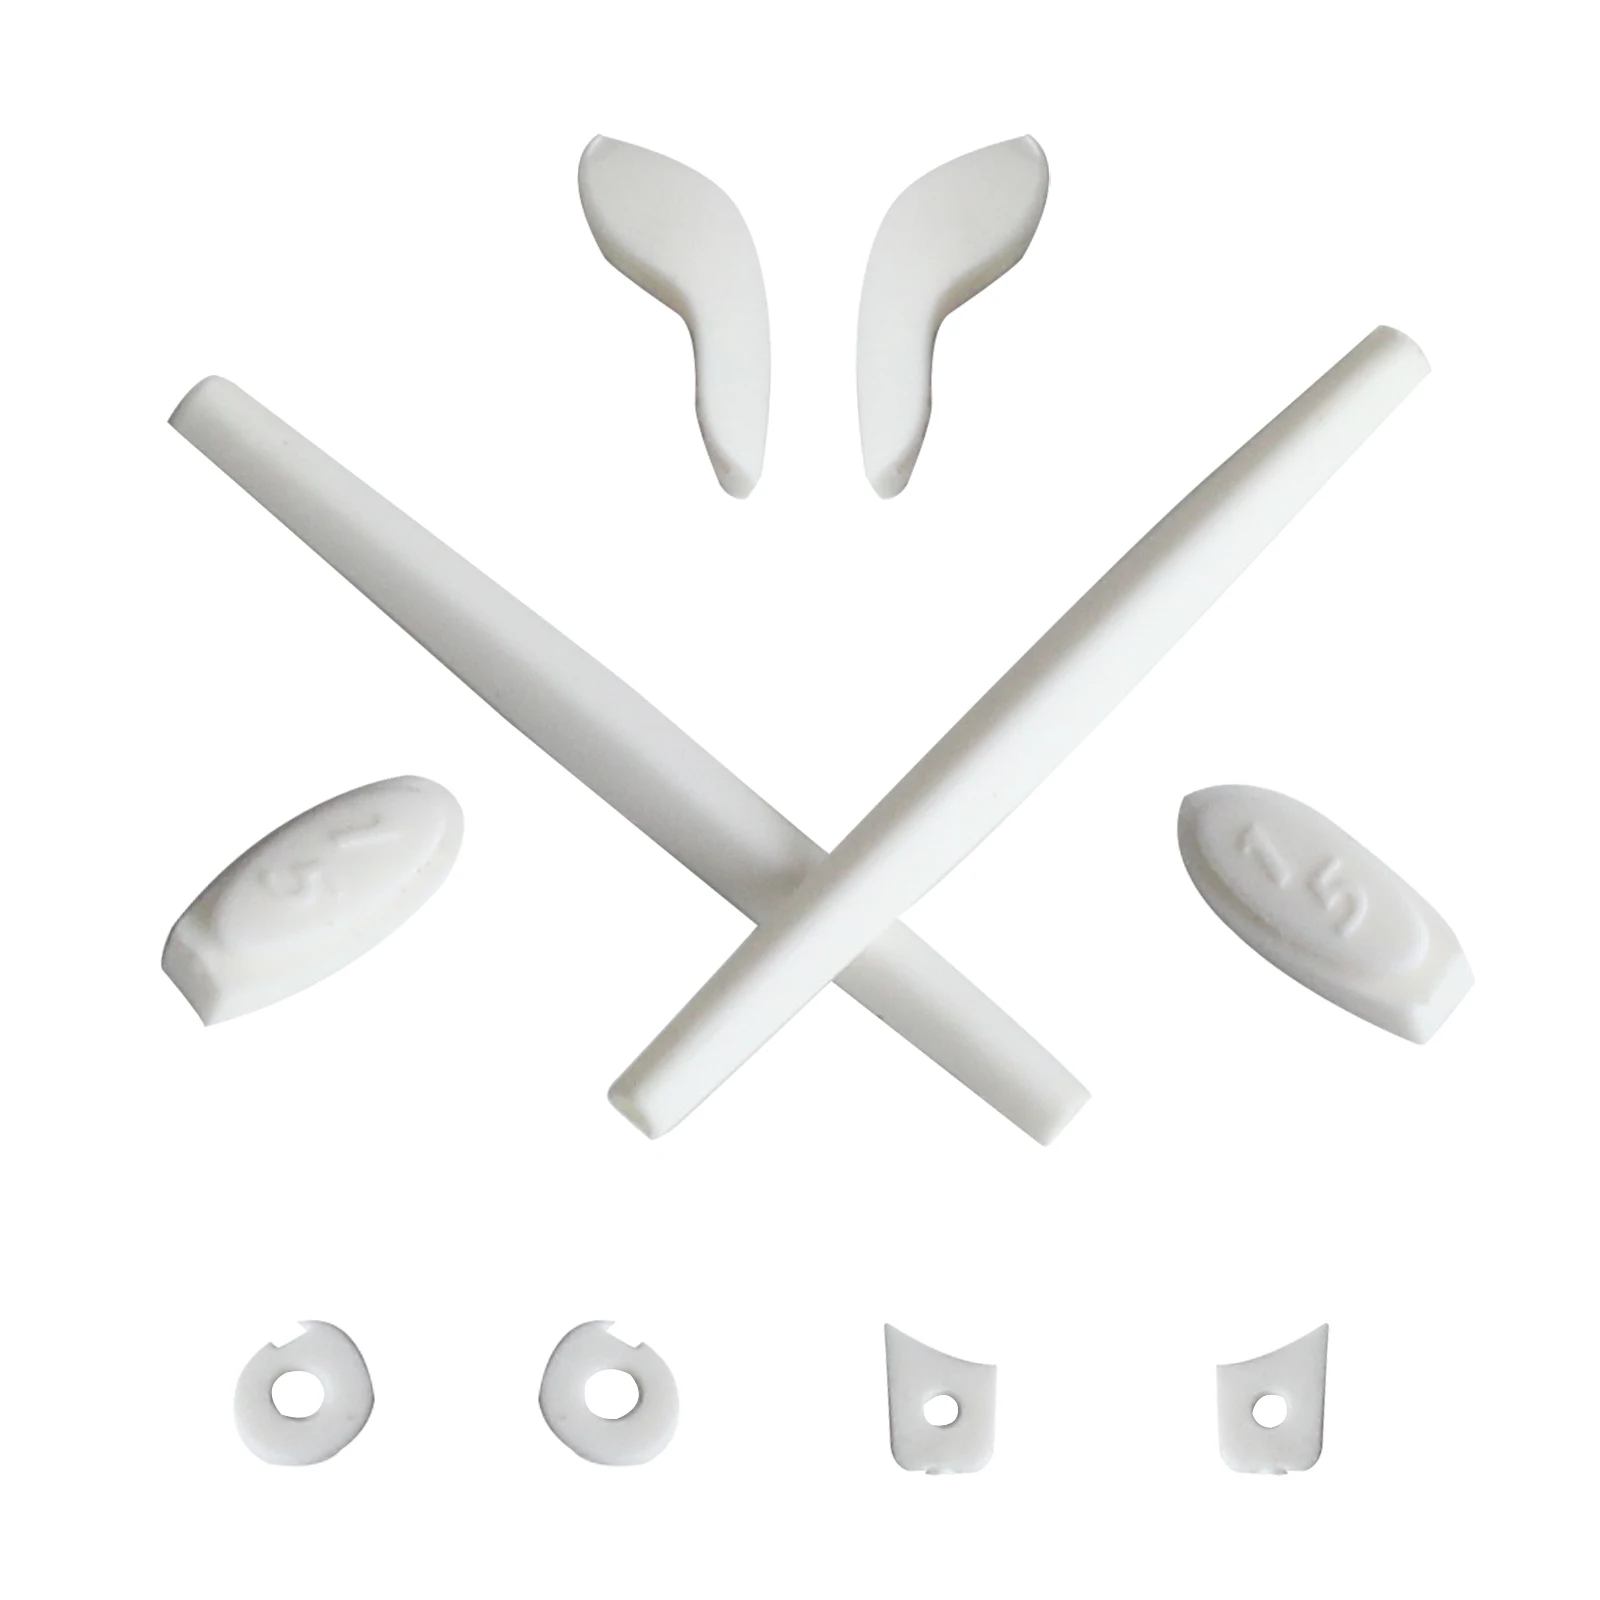 SNARK Rubber Kit Ear Socks / Nose Piece Replacements Compatible With Oakley Juliet Sunglass